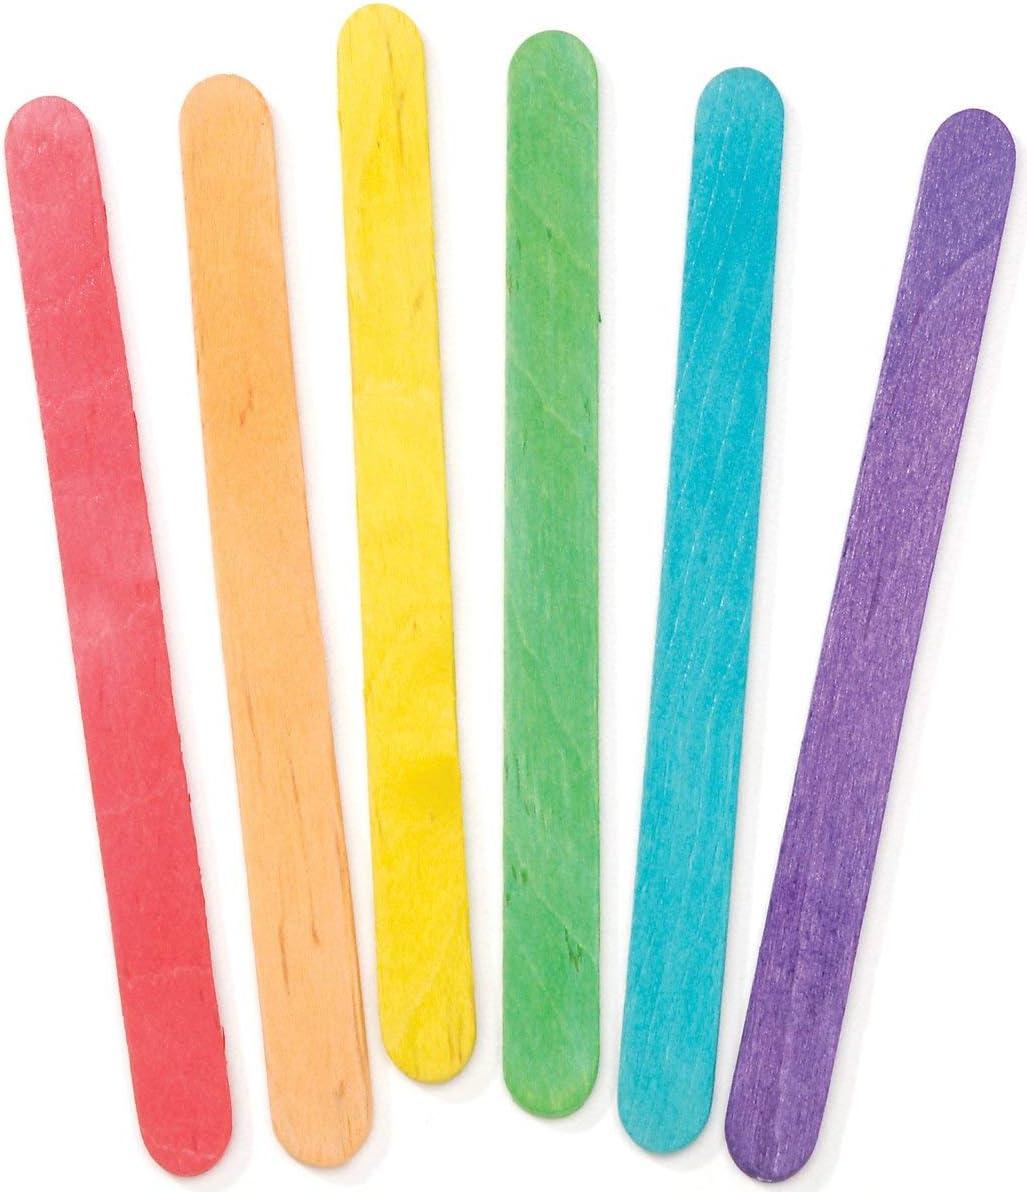  Green Popsicle Sticks for Crafts 4-1/2 inch, Pack of